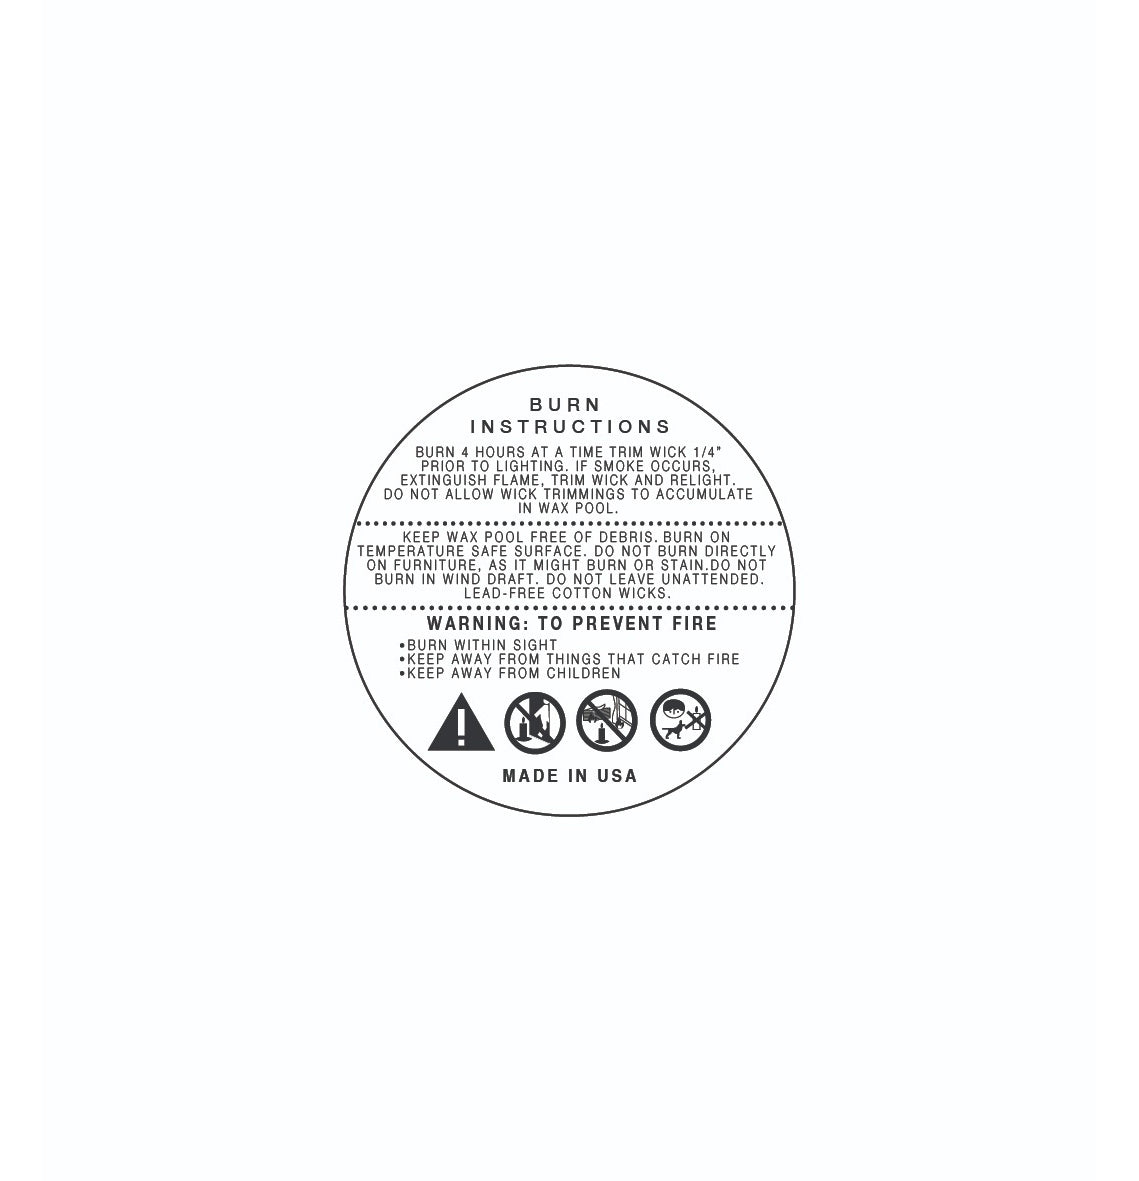 Buy Candle Warning Stickers, 1.5 Round Label,Sticker Decal for